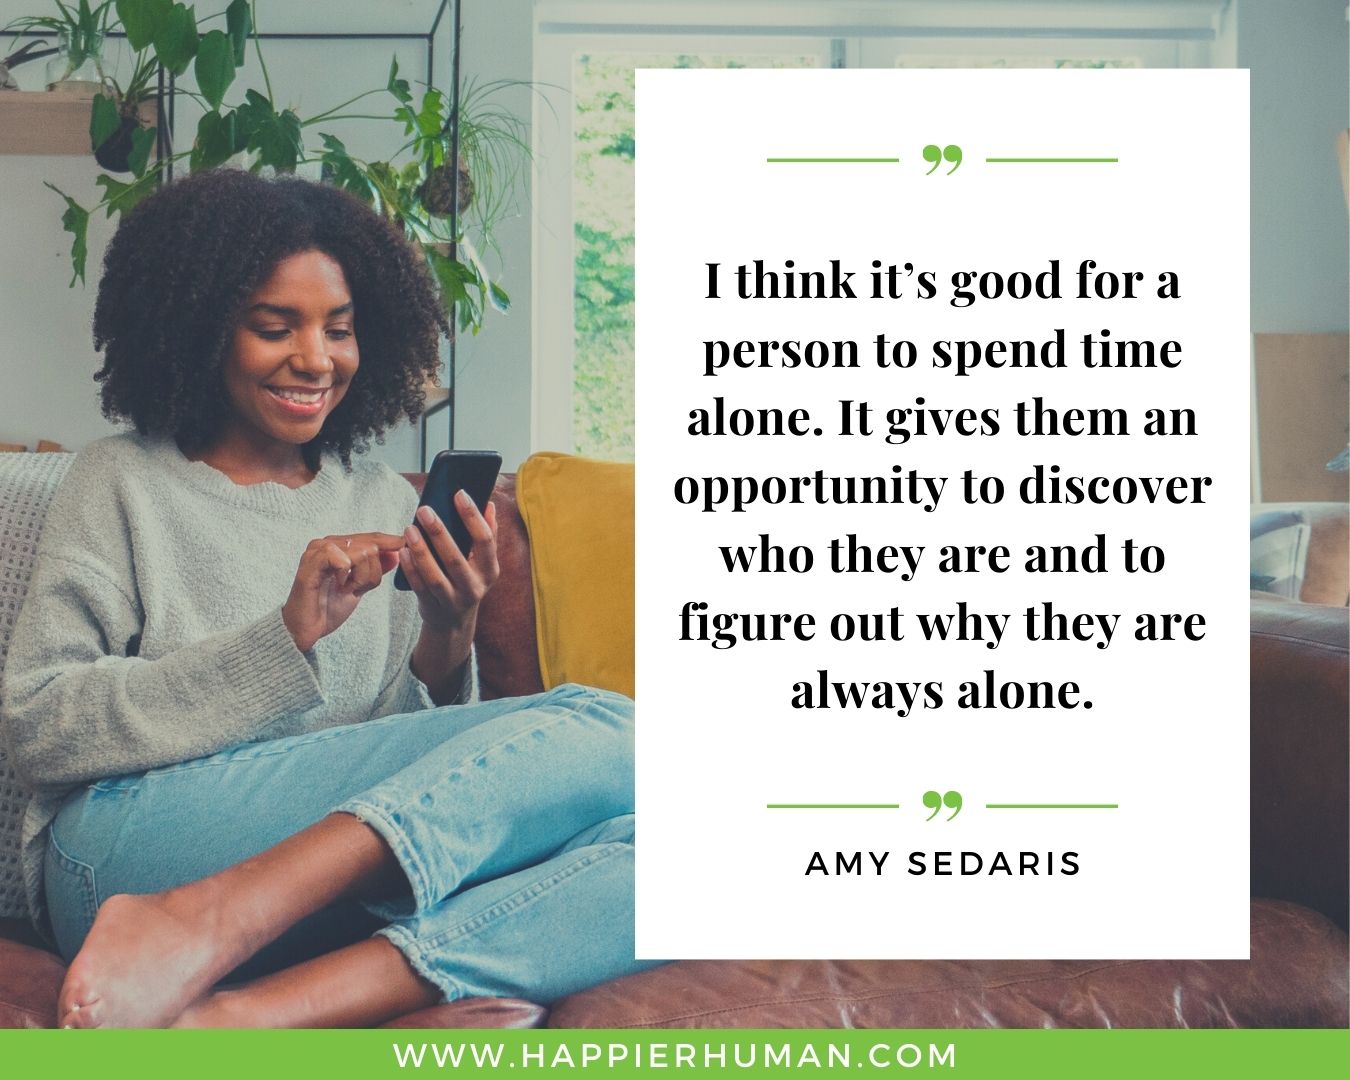 Loneliness Quotes - “I think it’s good for a person to spend time alone. It gives them an opportunity to discover who they are and to figure out why they are always alone.”– Amy Sedaris